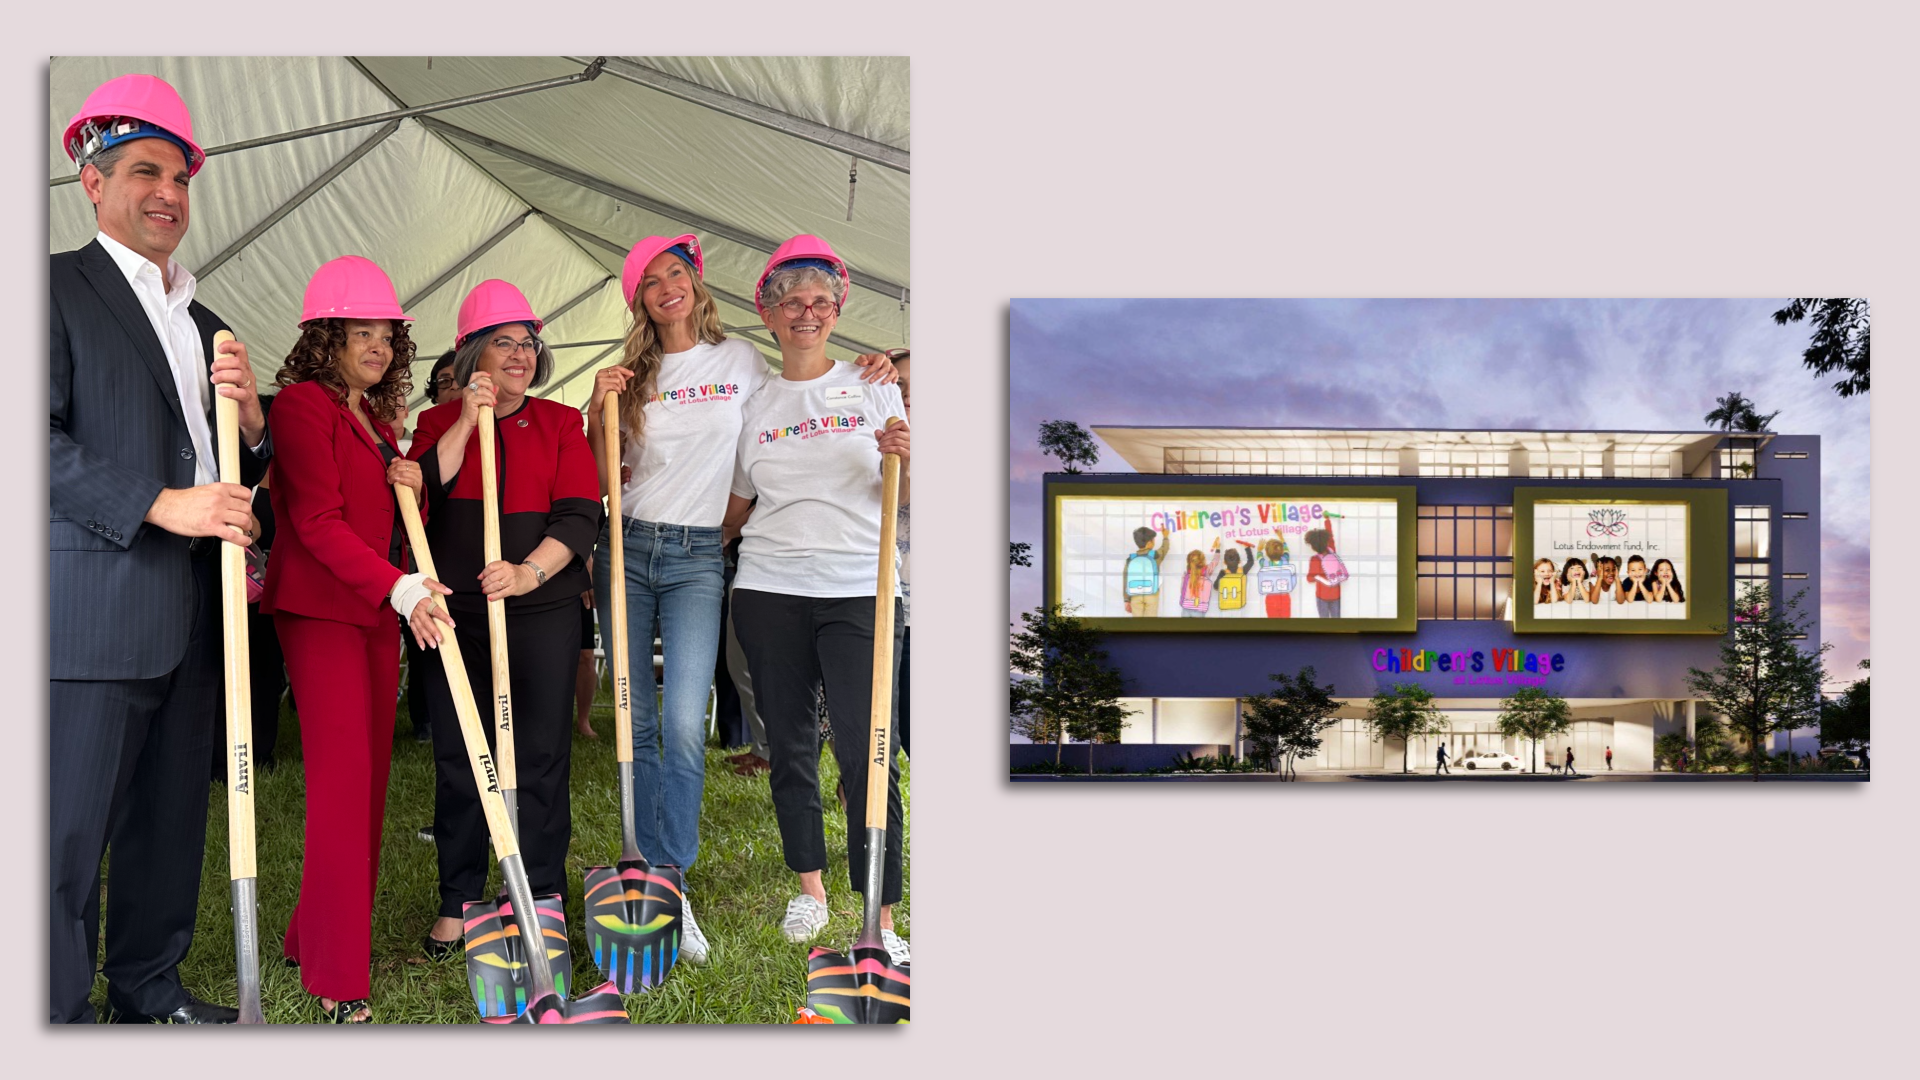 A photo collage shows a rendering of the new Children's Village facility and a groundbreaking with supermodel Gisele Bundchen and government leaders